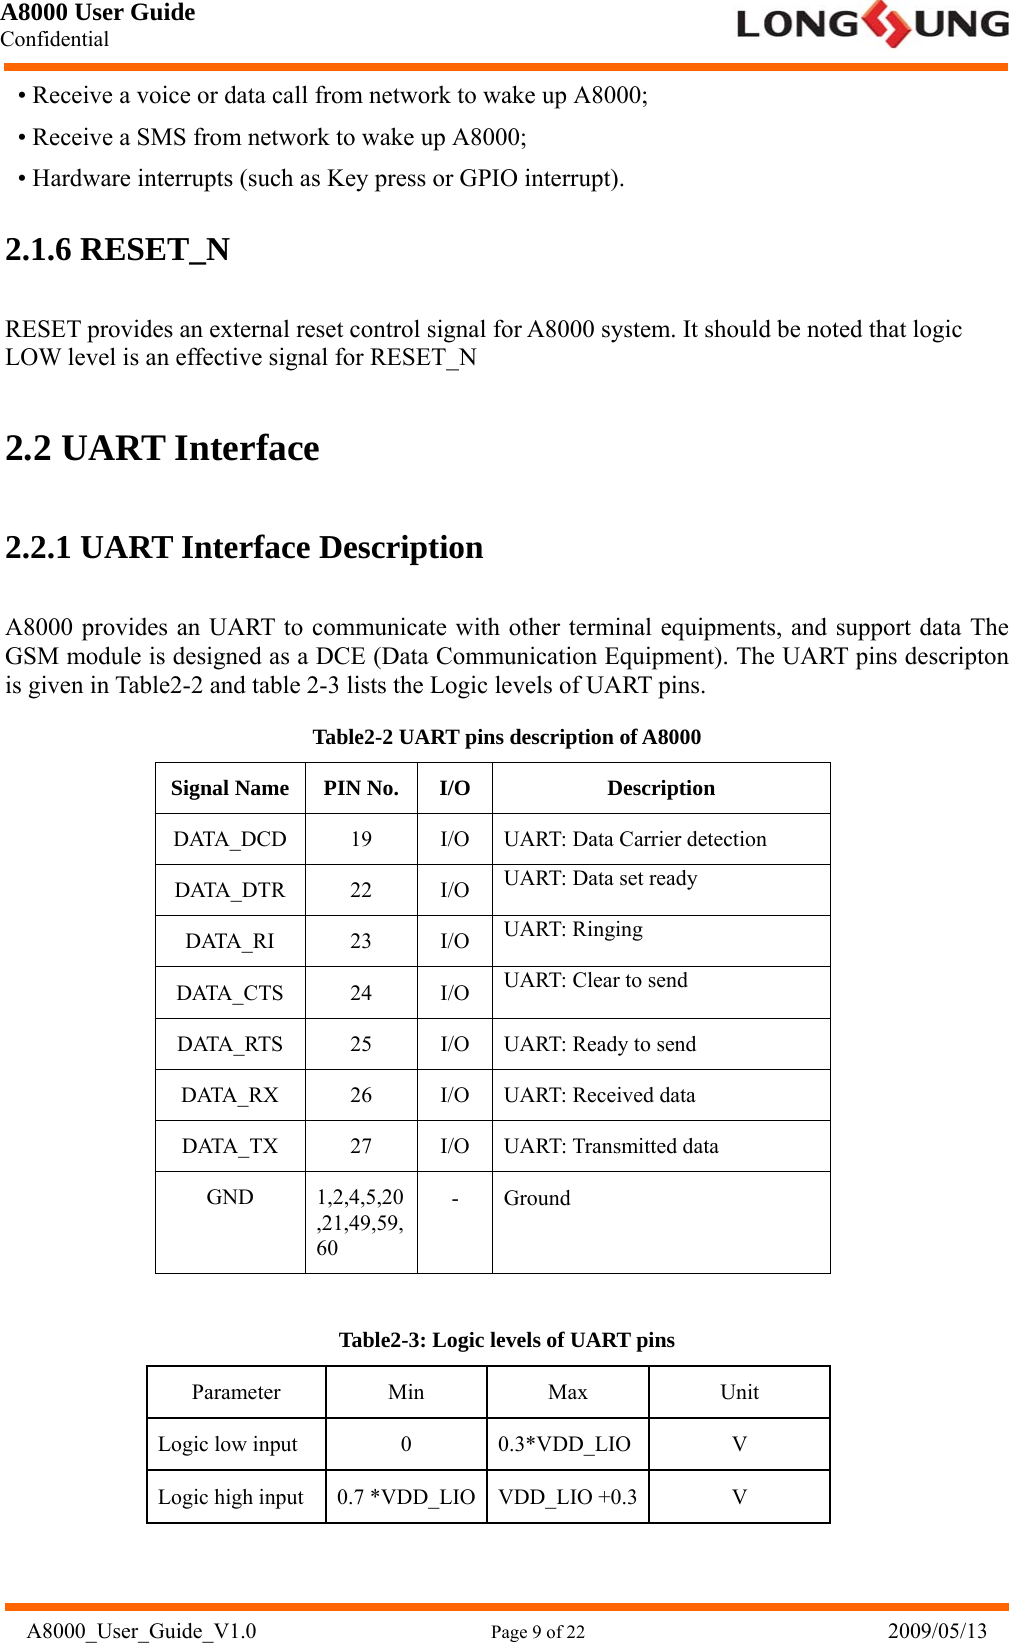 A8000 User Guide Confidential   A8000_User_Guide_V1.0                      Page 9 of 22                            2009/05/13 • Receive a voice or data call from network to wake up A8000;   • Receive a SMS from network to wake up A8000;   • Hardware interrupts (such as Key press or GPIO interrupt). 2.1.6 RESET_N RESET provides an external reset control signal for A8000 system. It should be noted that logic LOW level is an effective signal for RESET_N 2.2 UART Interface 2.2.1 UART Interface Description A8000 provides an UART to communicate with other terminal equipments, and support data The GSM module is designed as a DCE (Data Communication Equipment). The UART pins descripton is given in Table2-2 and table 2-3 lists the Logic levels of UART pins. Table2-2 UART pins description of A8000 Signal Name  PIN No.  I/O  Description DATA_DCD  19  I/O  UART: Data Carrier detection DATA_DTR 22  I/O UART: Data set ready DATA_RI 23 I/O UART: Ringing DATA_CTS 24 I/O UART: Clear to send DATA_RTS  25  I/O  UART: Ready to send DATA_RX  26  I/O  UART: Received data DATA_TX 27 I/O UART: Transmitted data GND 1,2,4,5,20,21,49,59,60 - Ground  Table2-3: Logic levels of UART pins Parameter Min  Max  Unit Logic low input  0  0.3*VDD_LIO V Logic high input  0.7 *VDD_LIO VDD_LIO +0.3  V 